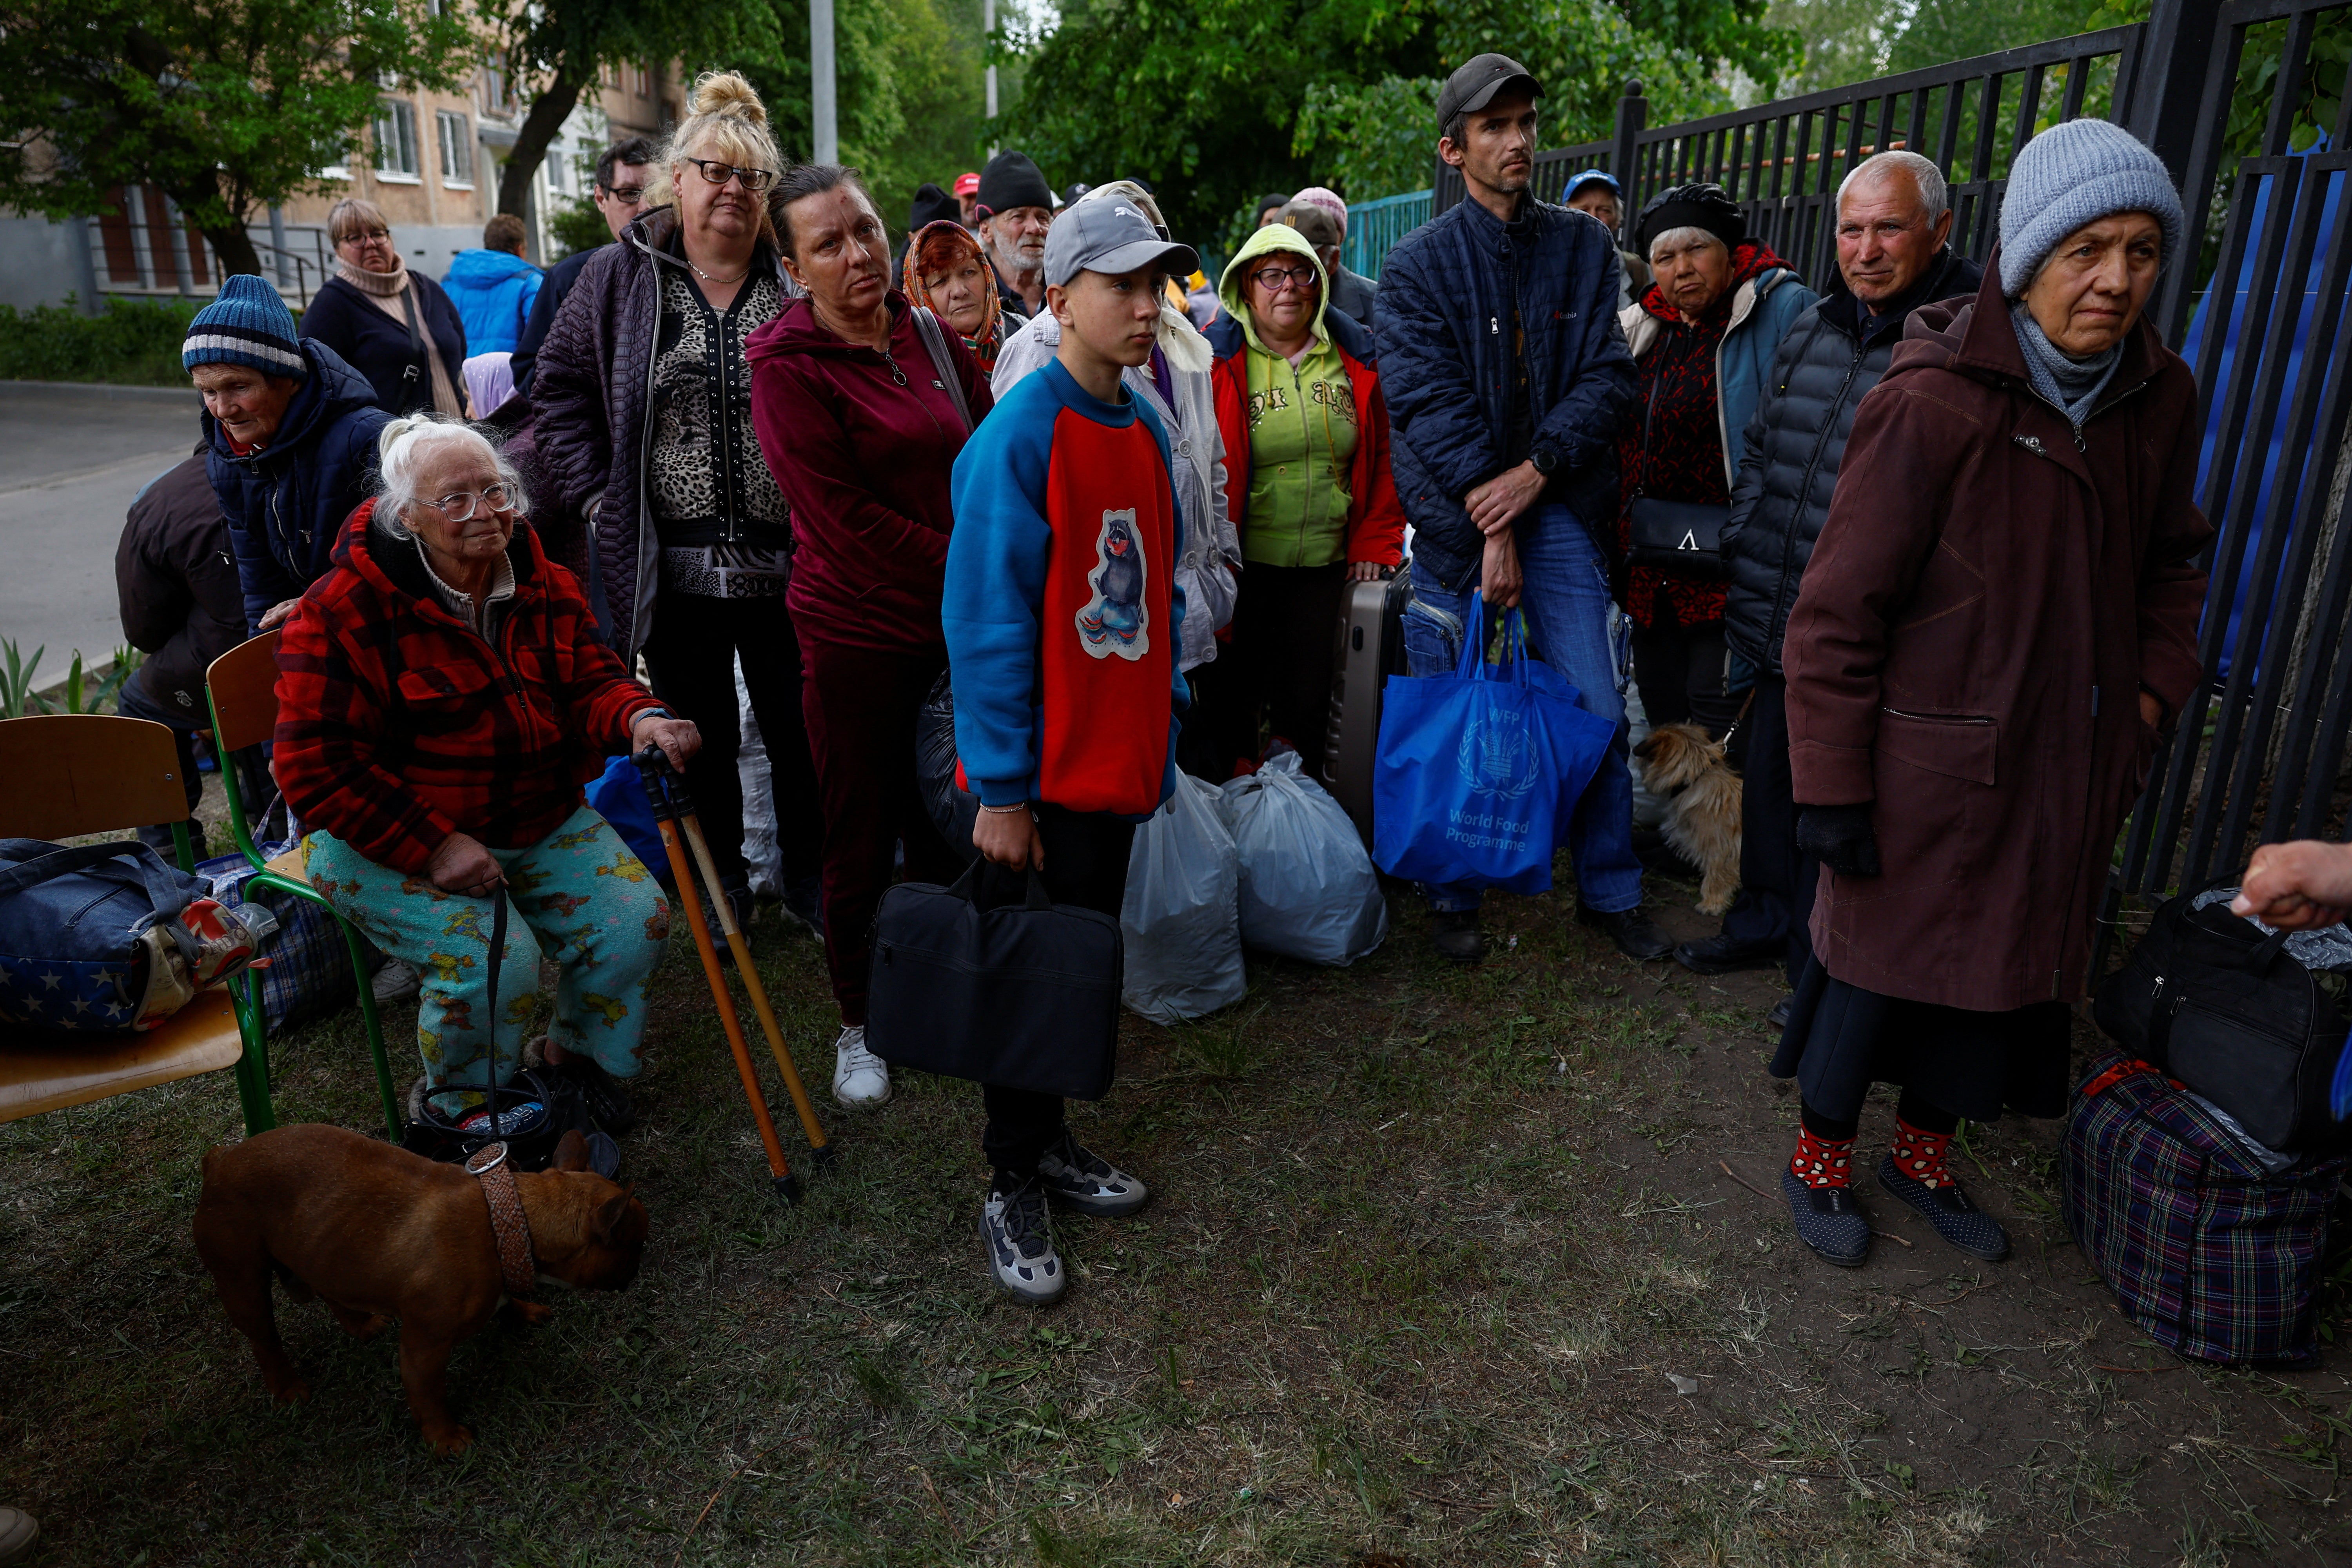 Vovchansk area residents, who fled due to Russian military strikes, gather at an evacuation centre compound in Kharkiv region